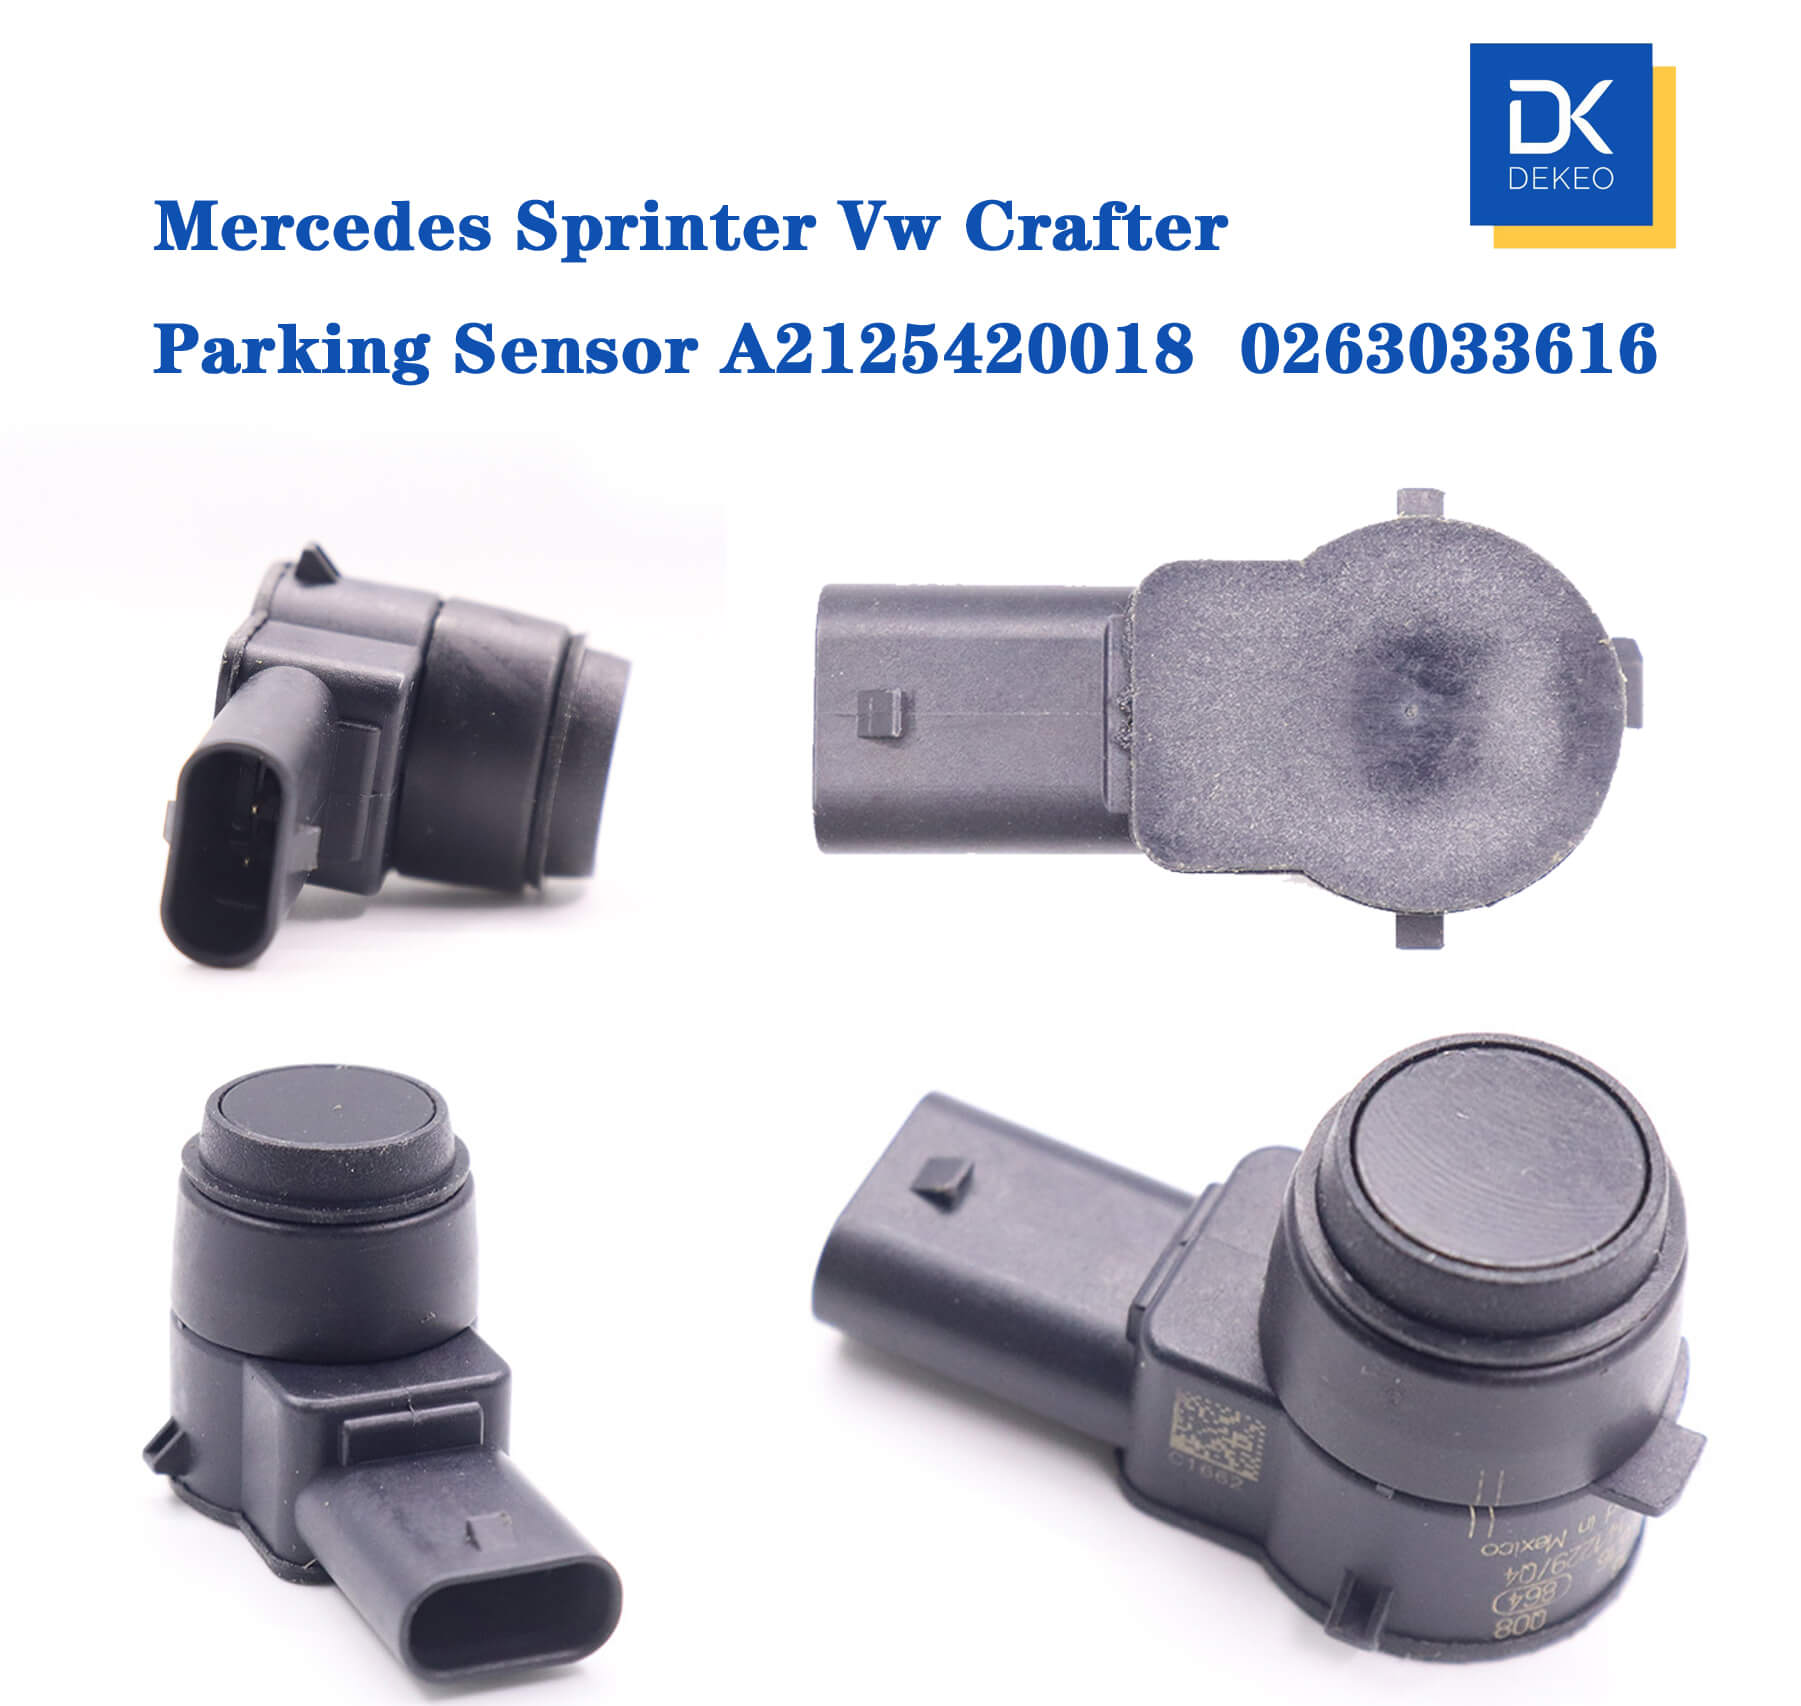 High-Quality Parking Sensor A2125420018 for Mercedes Benz: Reliable Back-Up Assistance